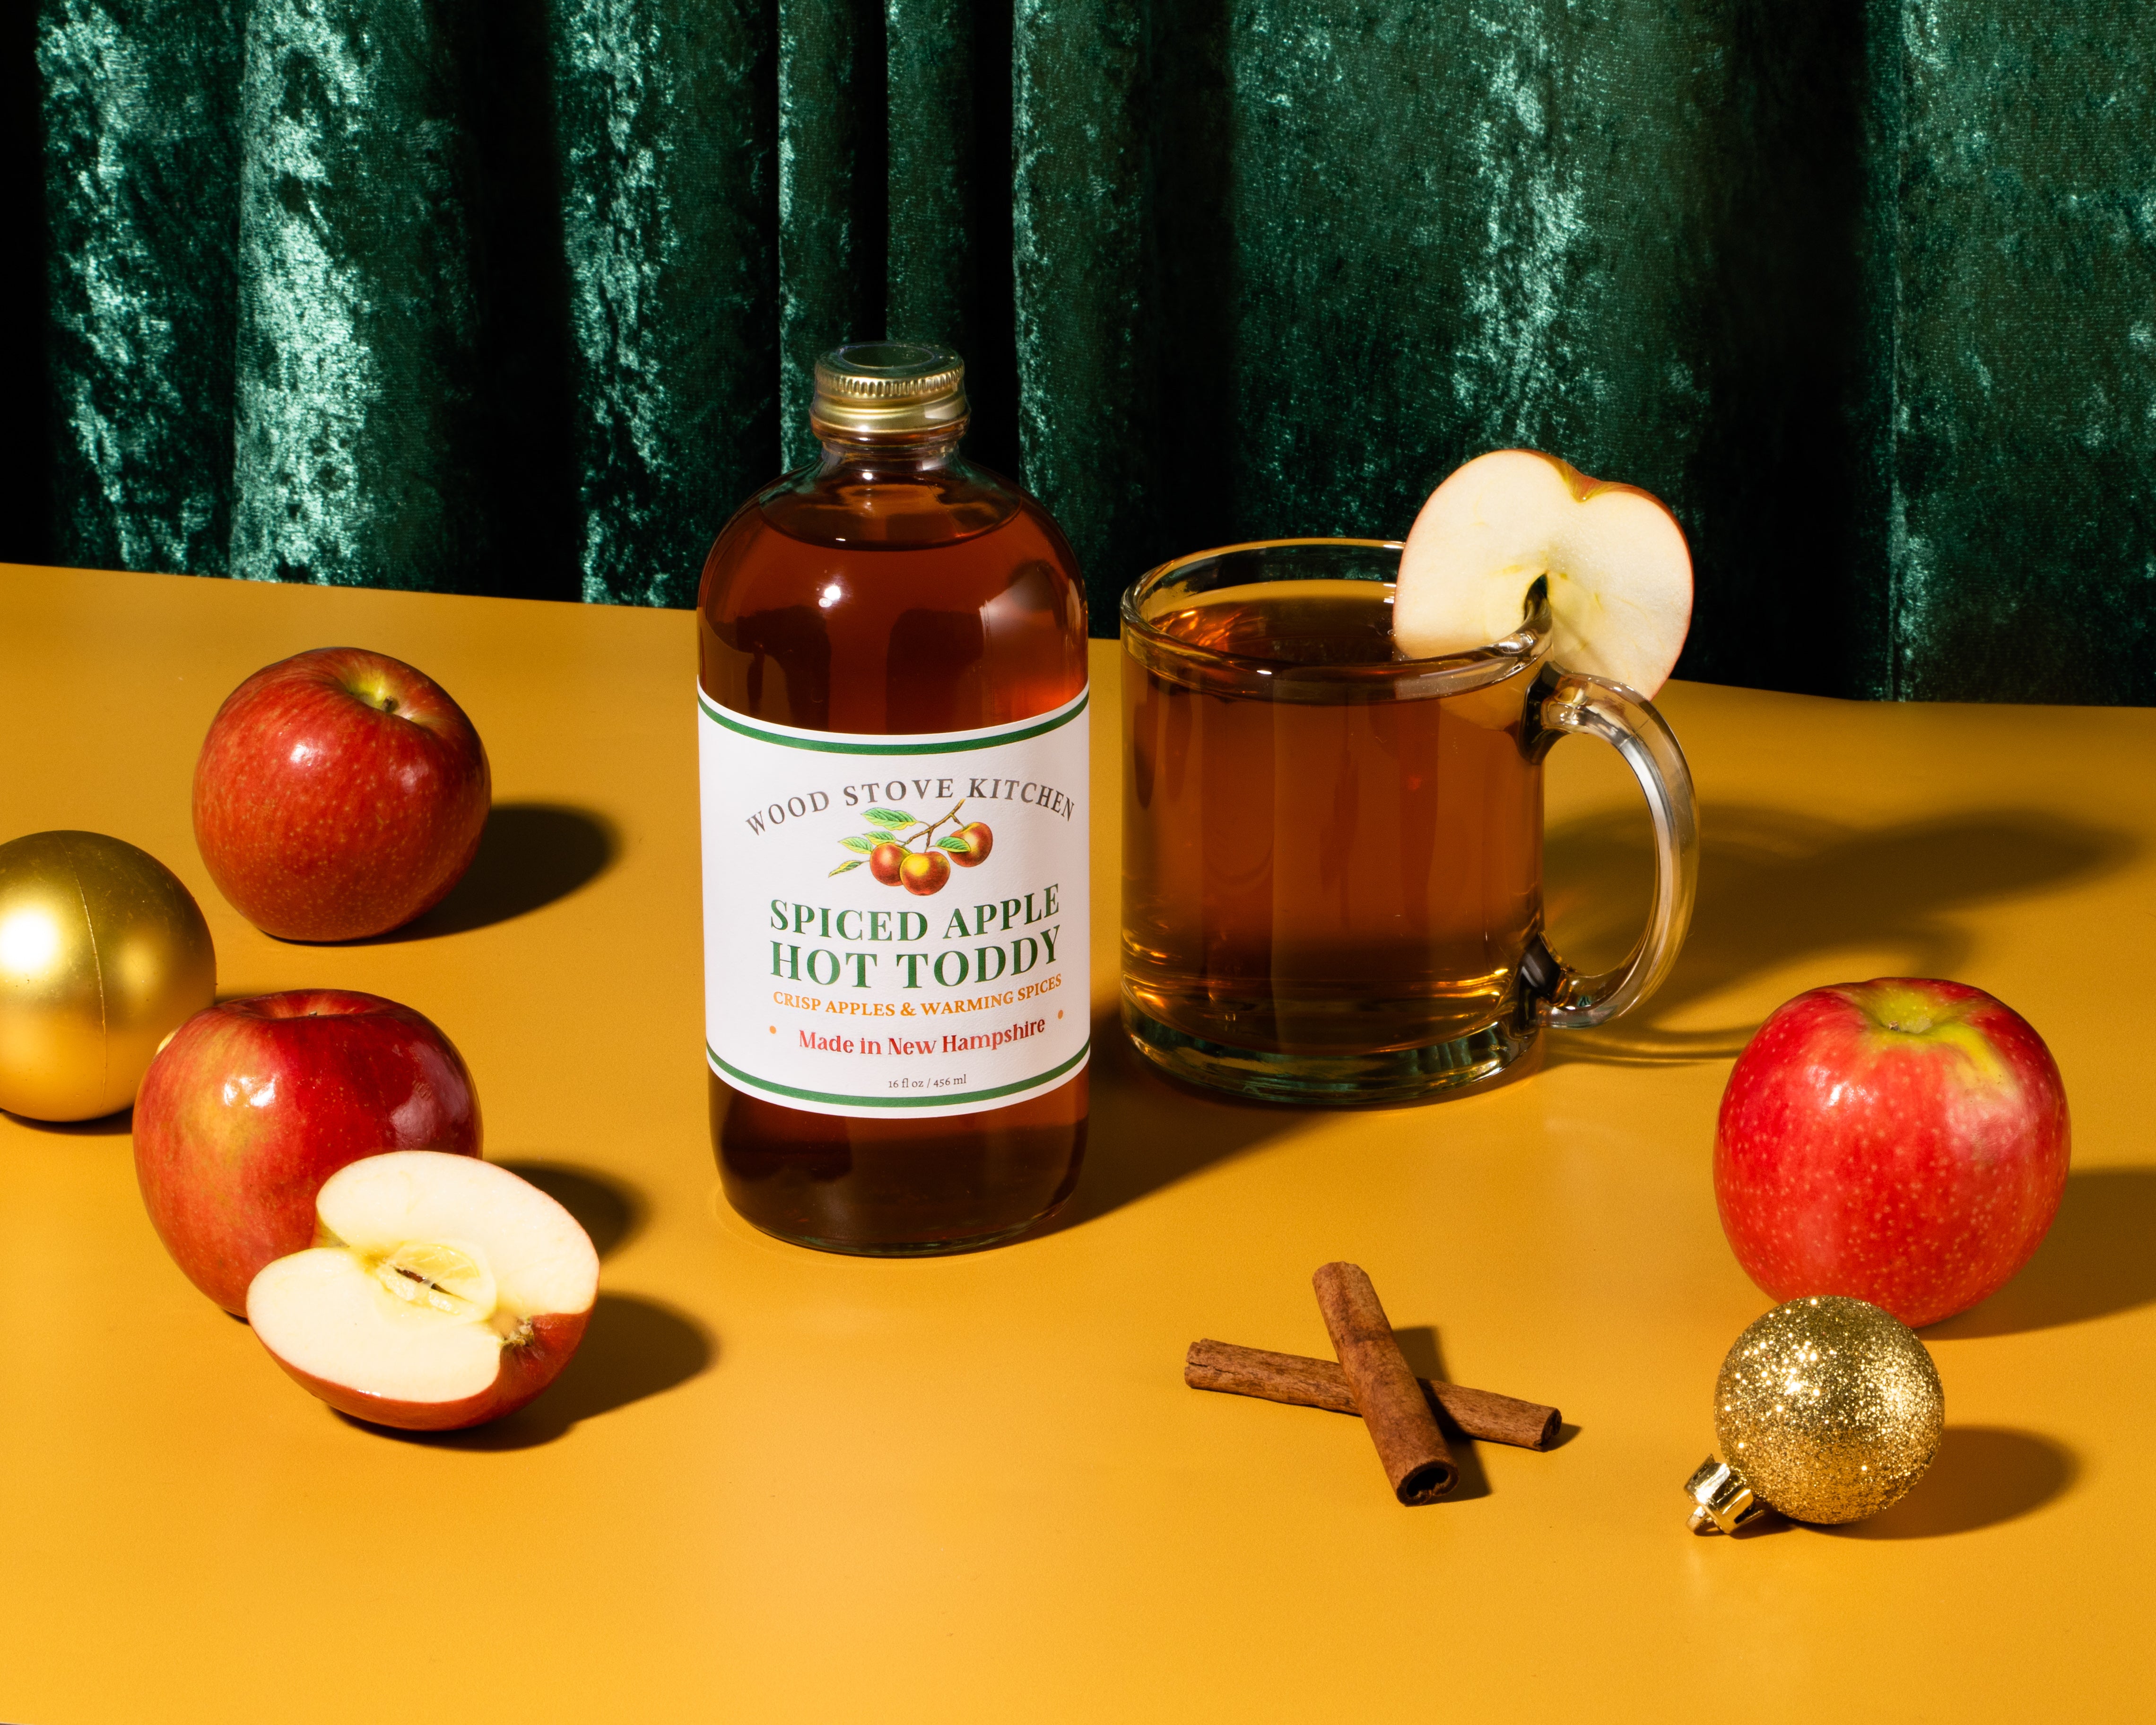 Spiced Apple Hot Toddy